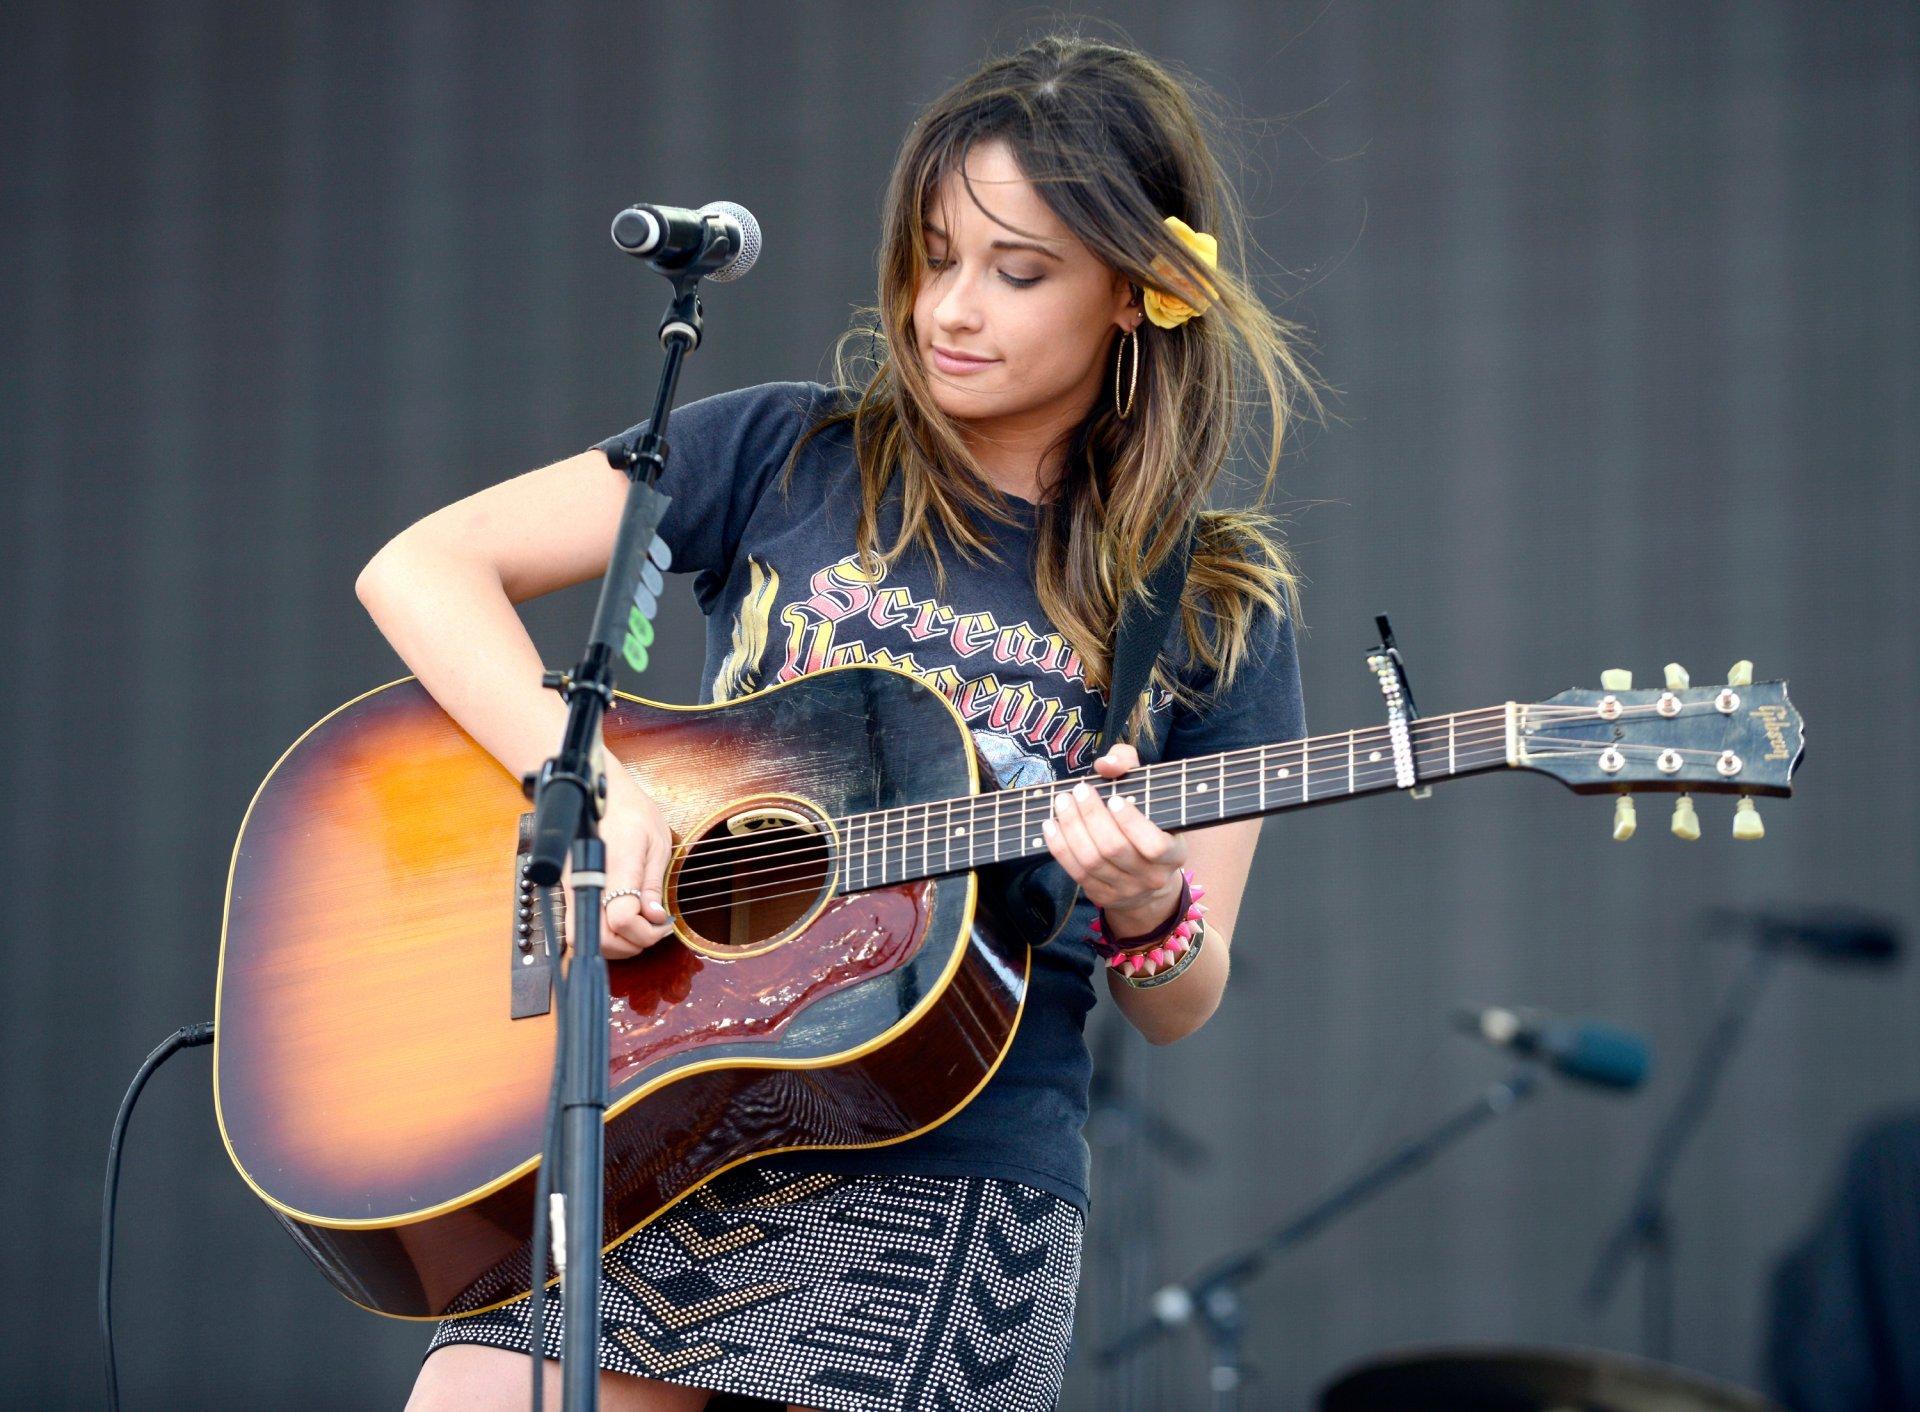 kacey musgraves casey masgreyvs is an american country music singer